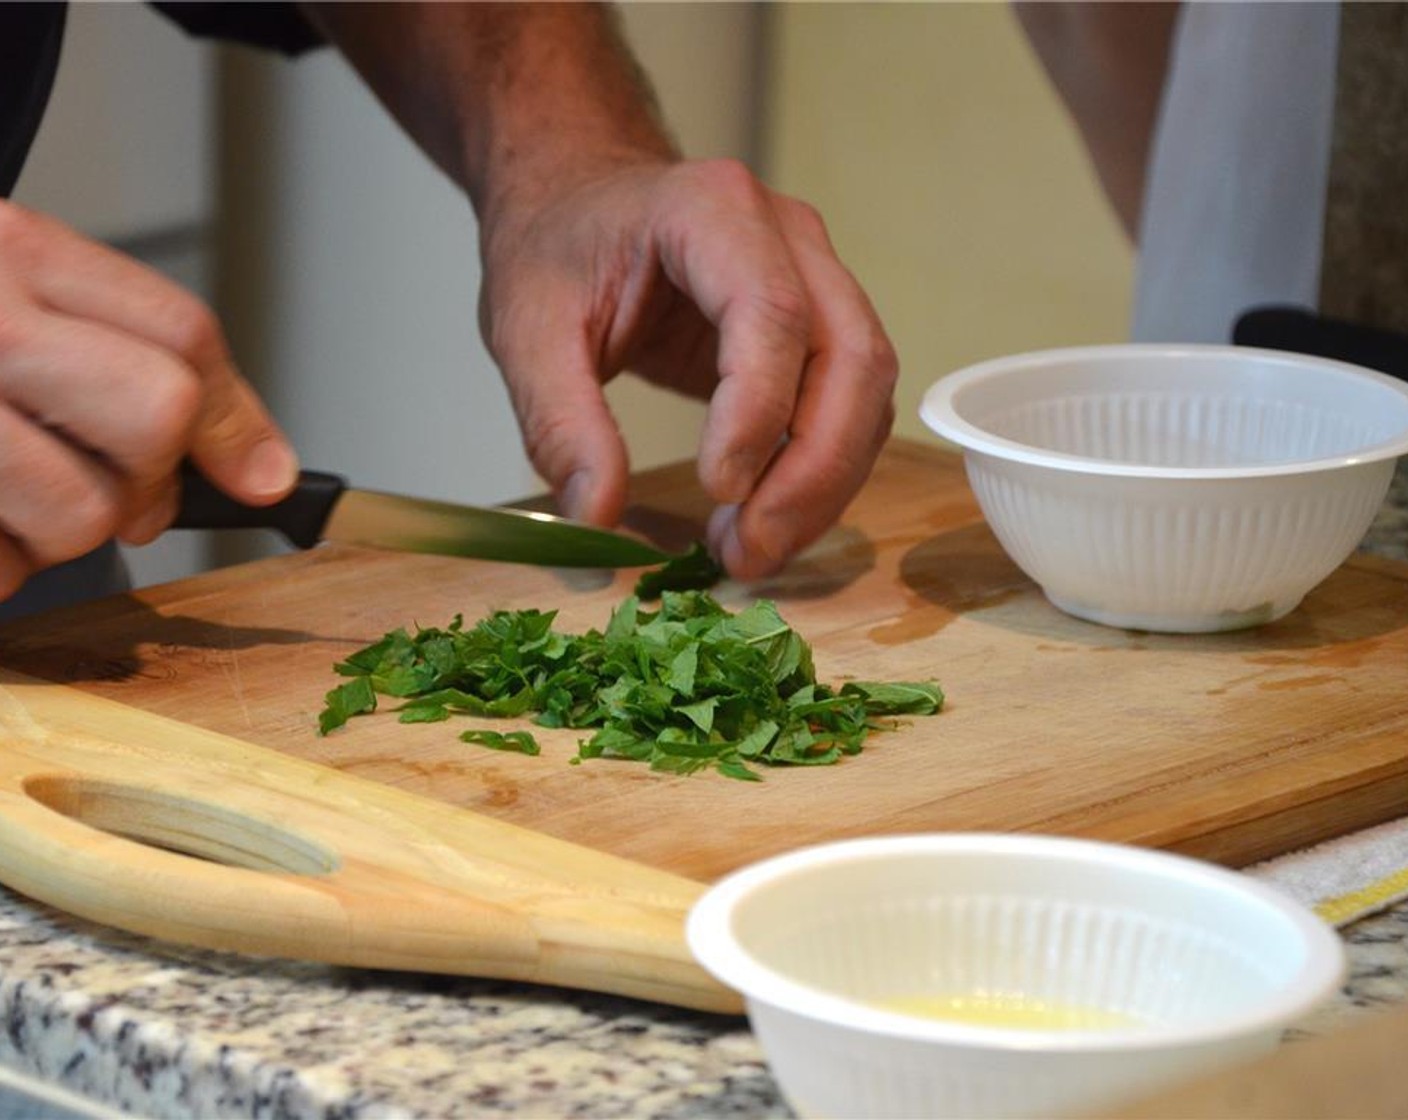 step 2 Tear the Fresh Mint Leaves (6) or thinly slice with a knife by dragging it across to prevent bruising.